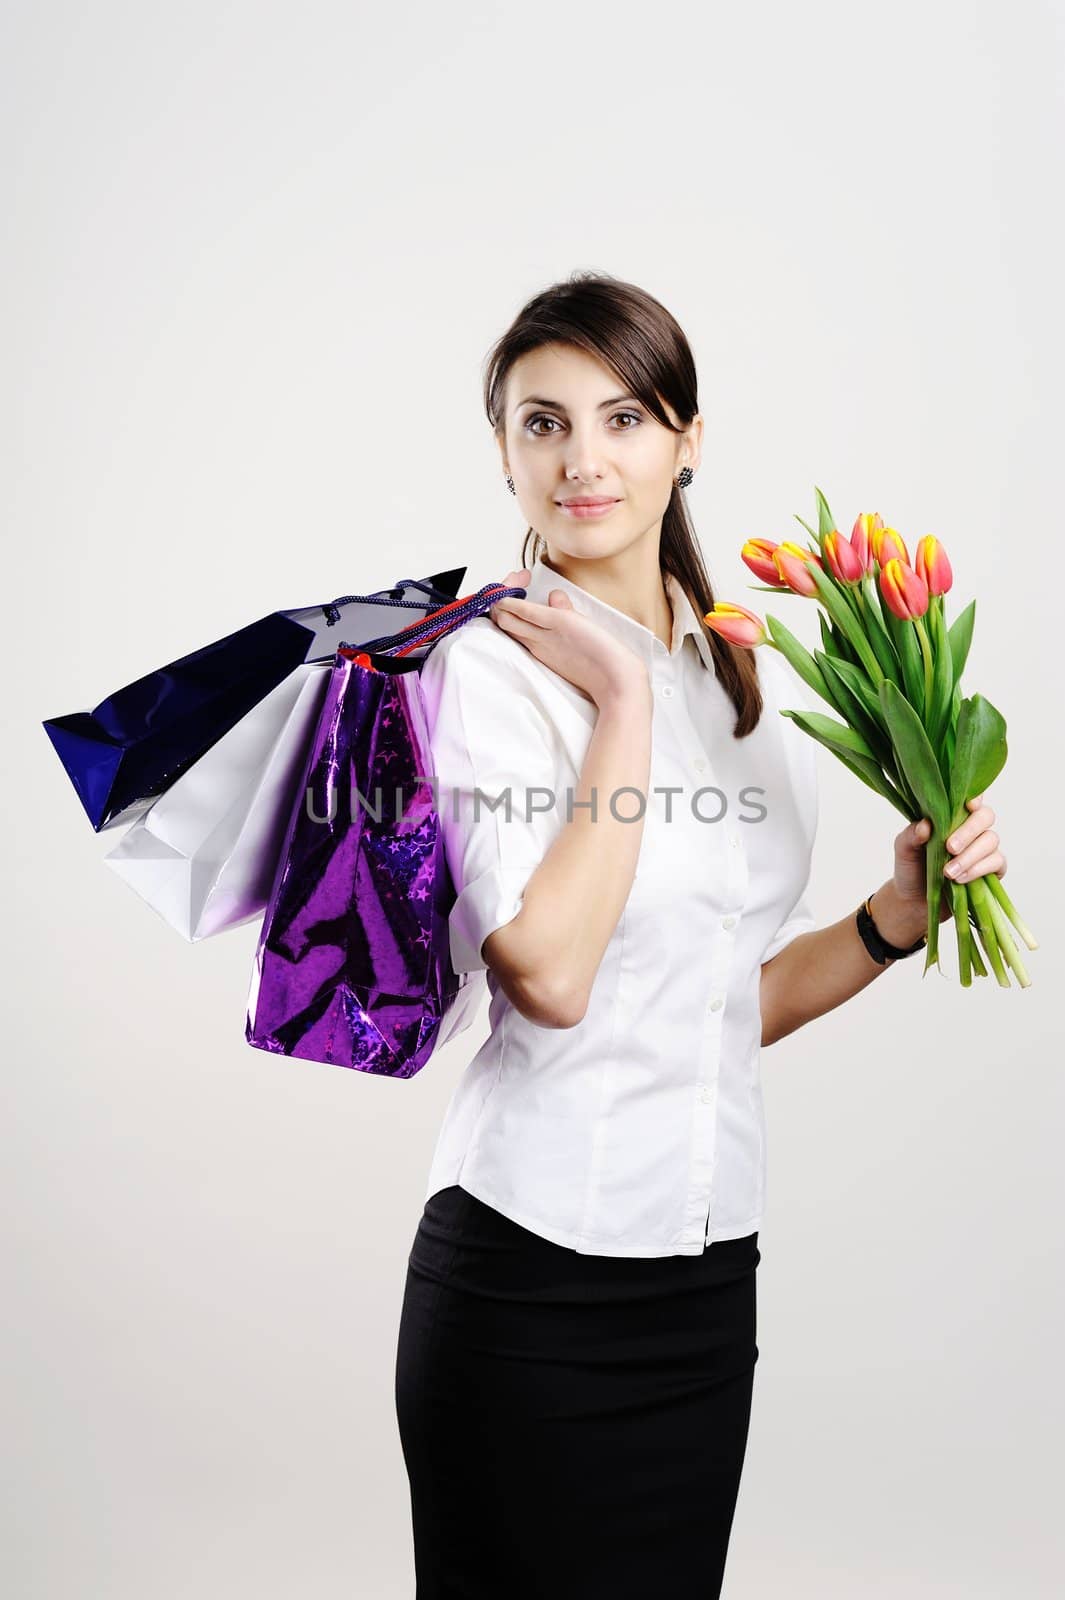 An image of young woman with tulips and with bags